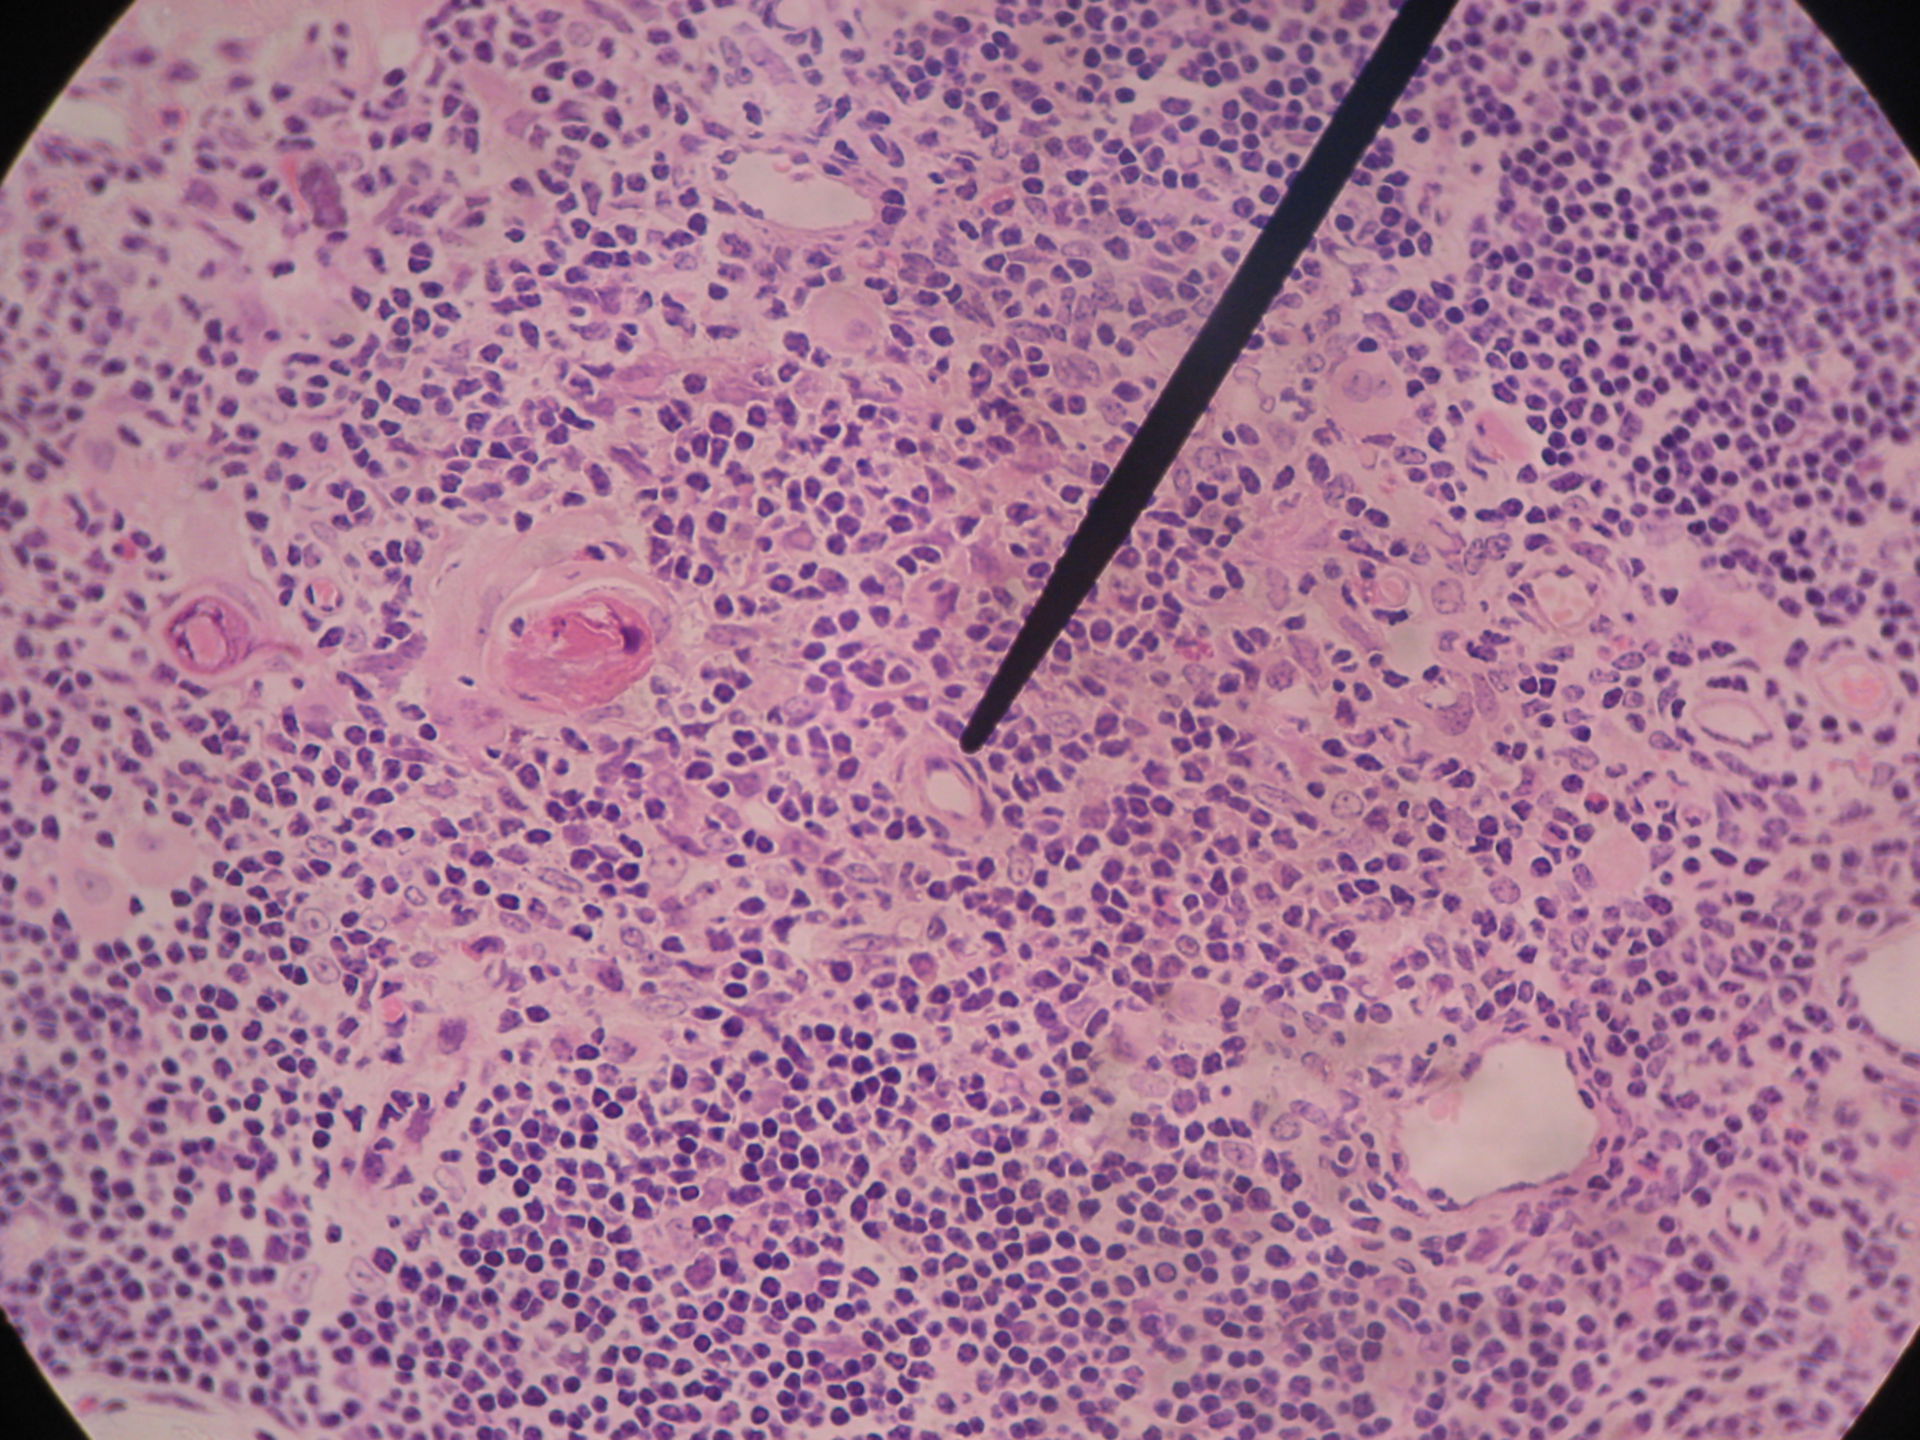 Thymus gland of a sheep 3 - capillary, Hassall-bodies, macrophages, T-cells, eosinophil-degenerated epithelium cells